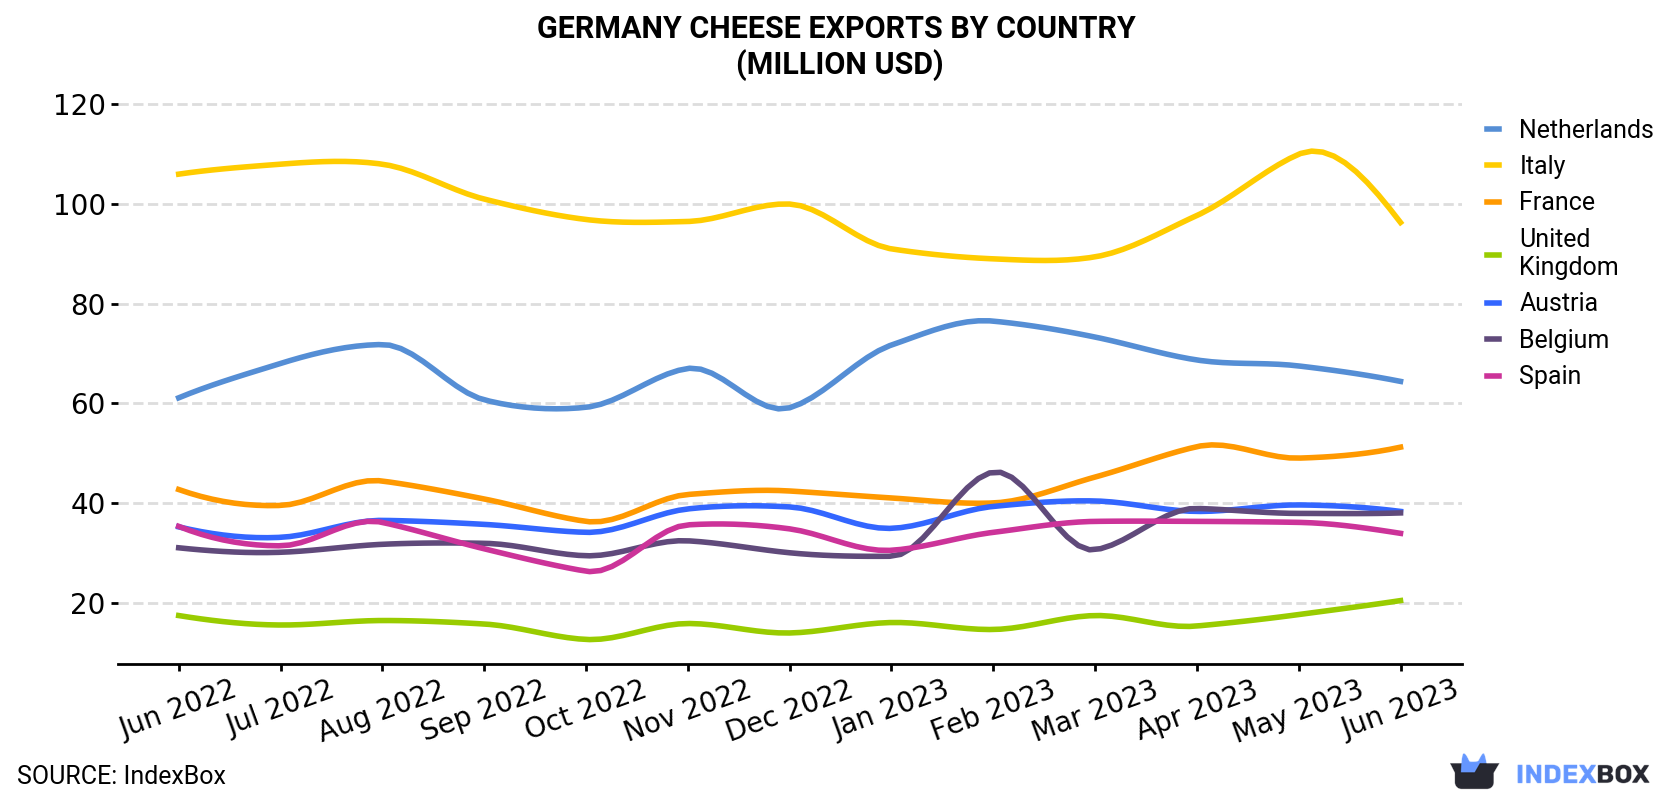 Germany Cheese Exports By Country (Million USD)